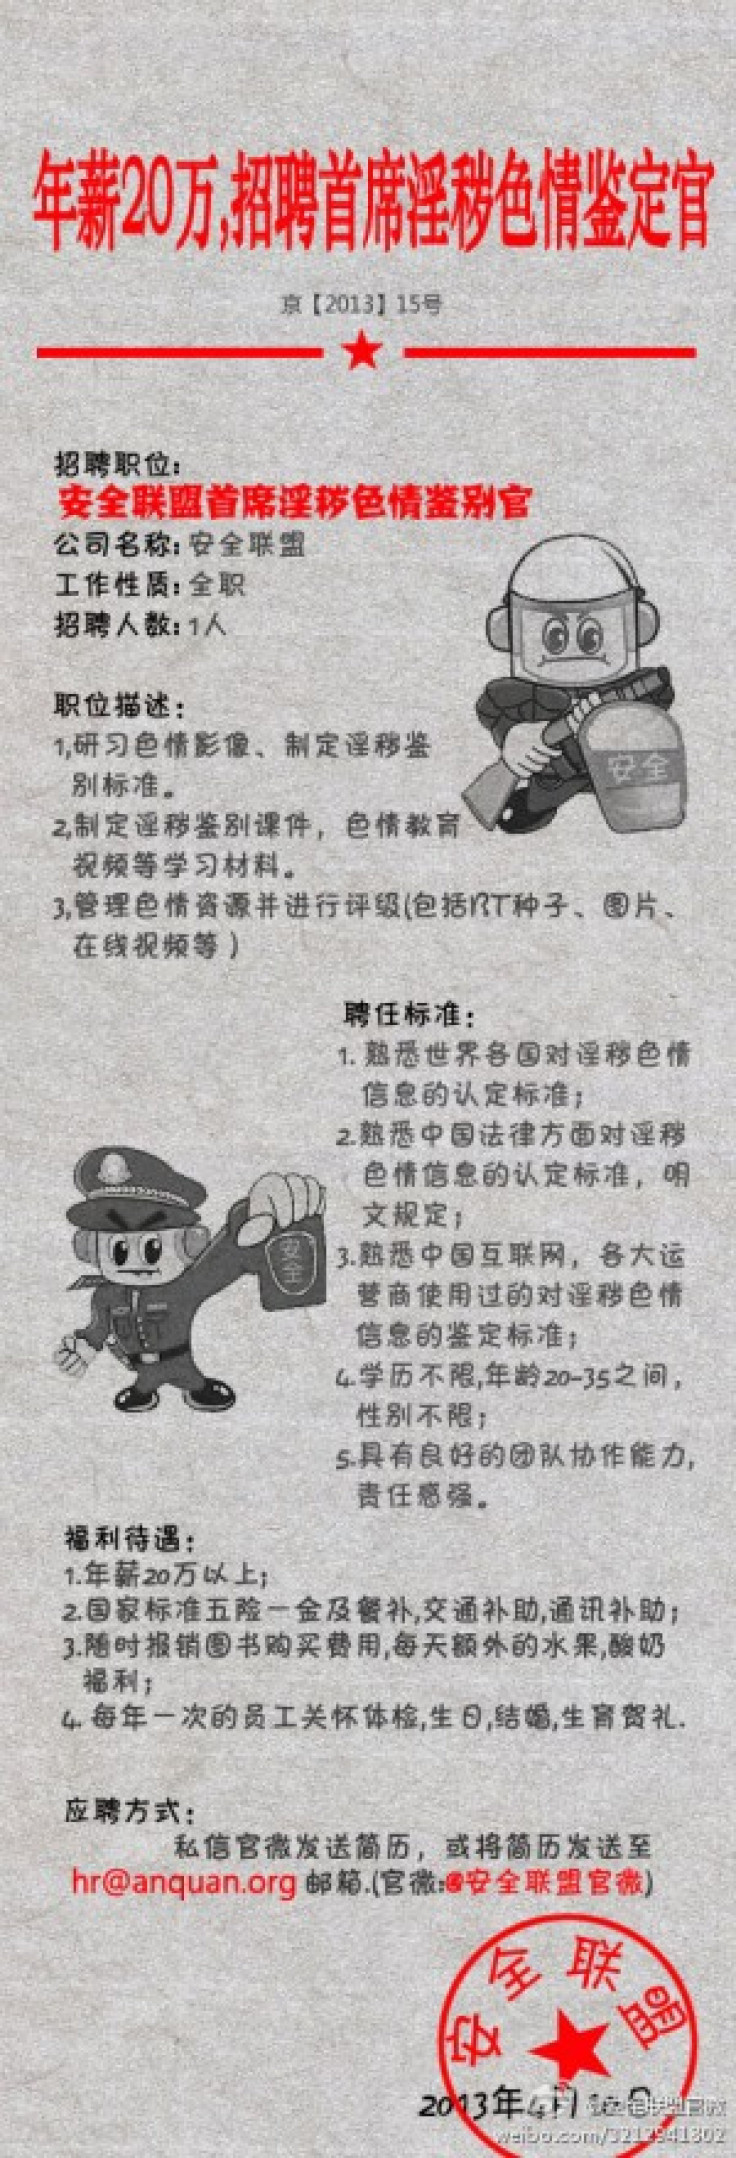 Weibo Job Listing For Anti-Porn Officer